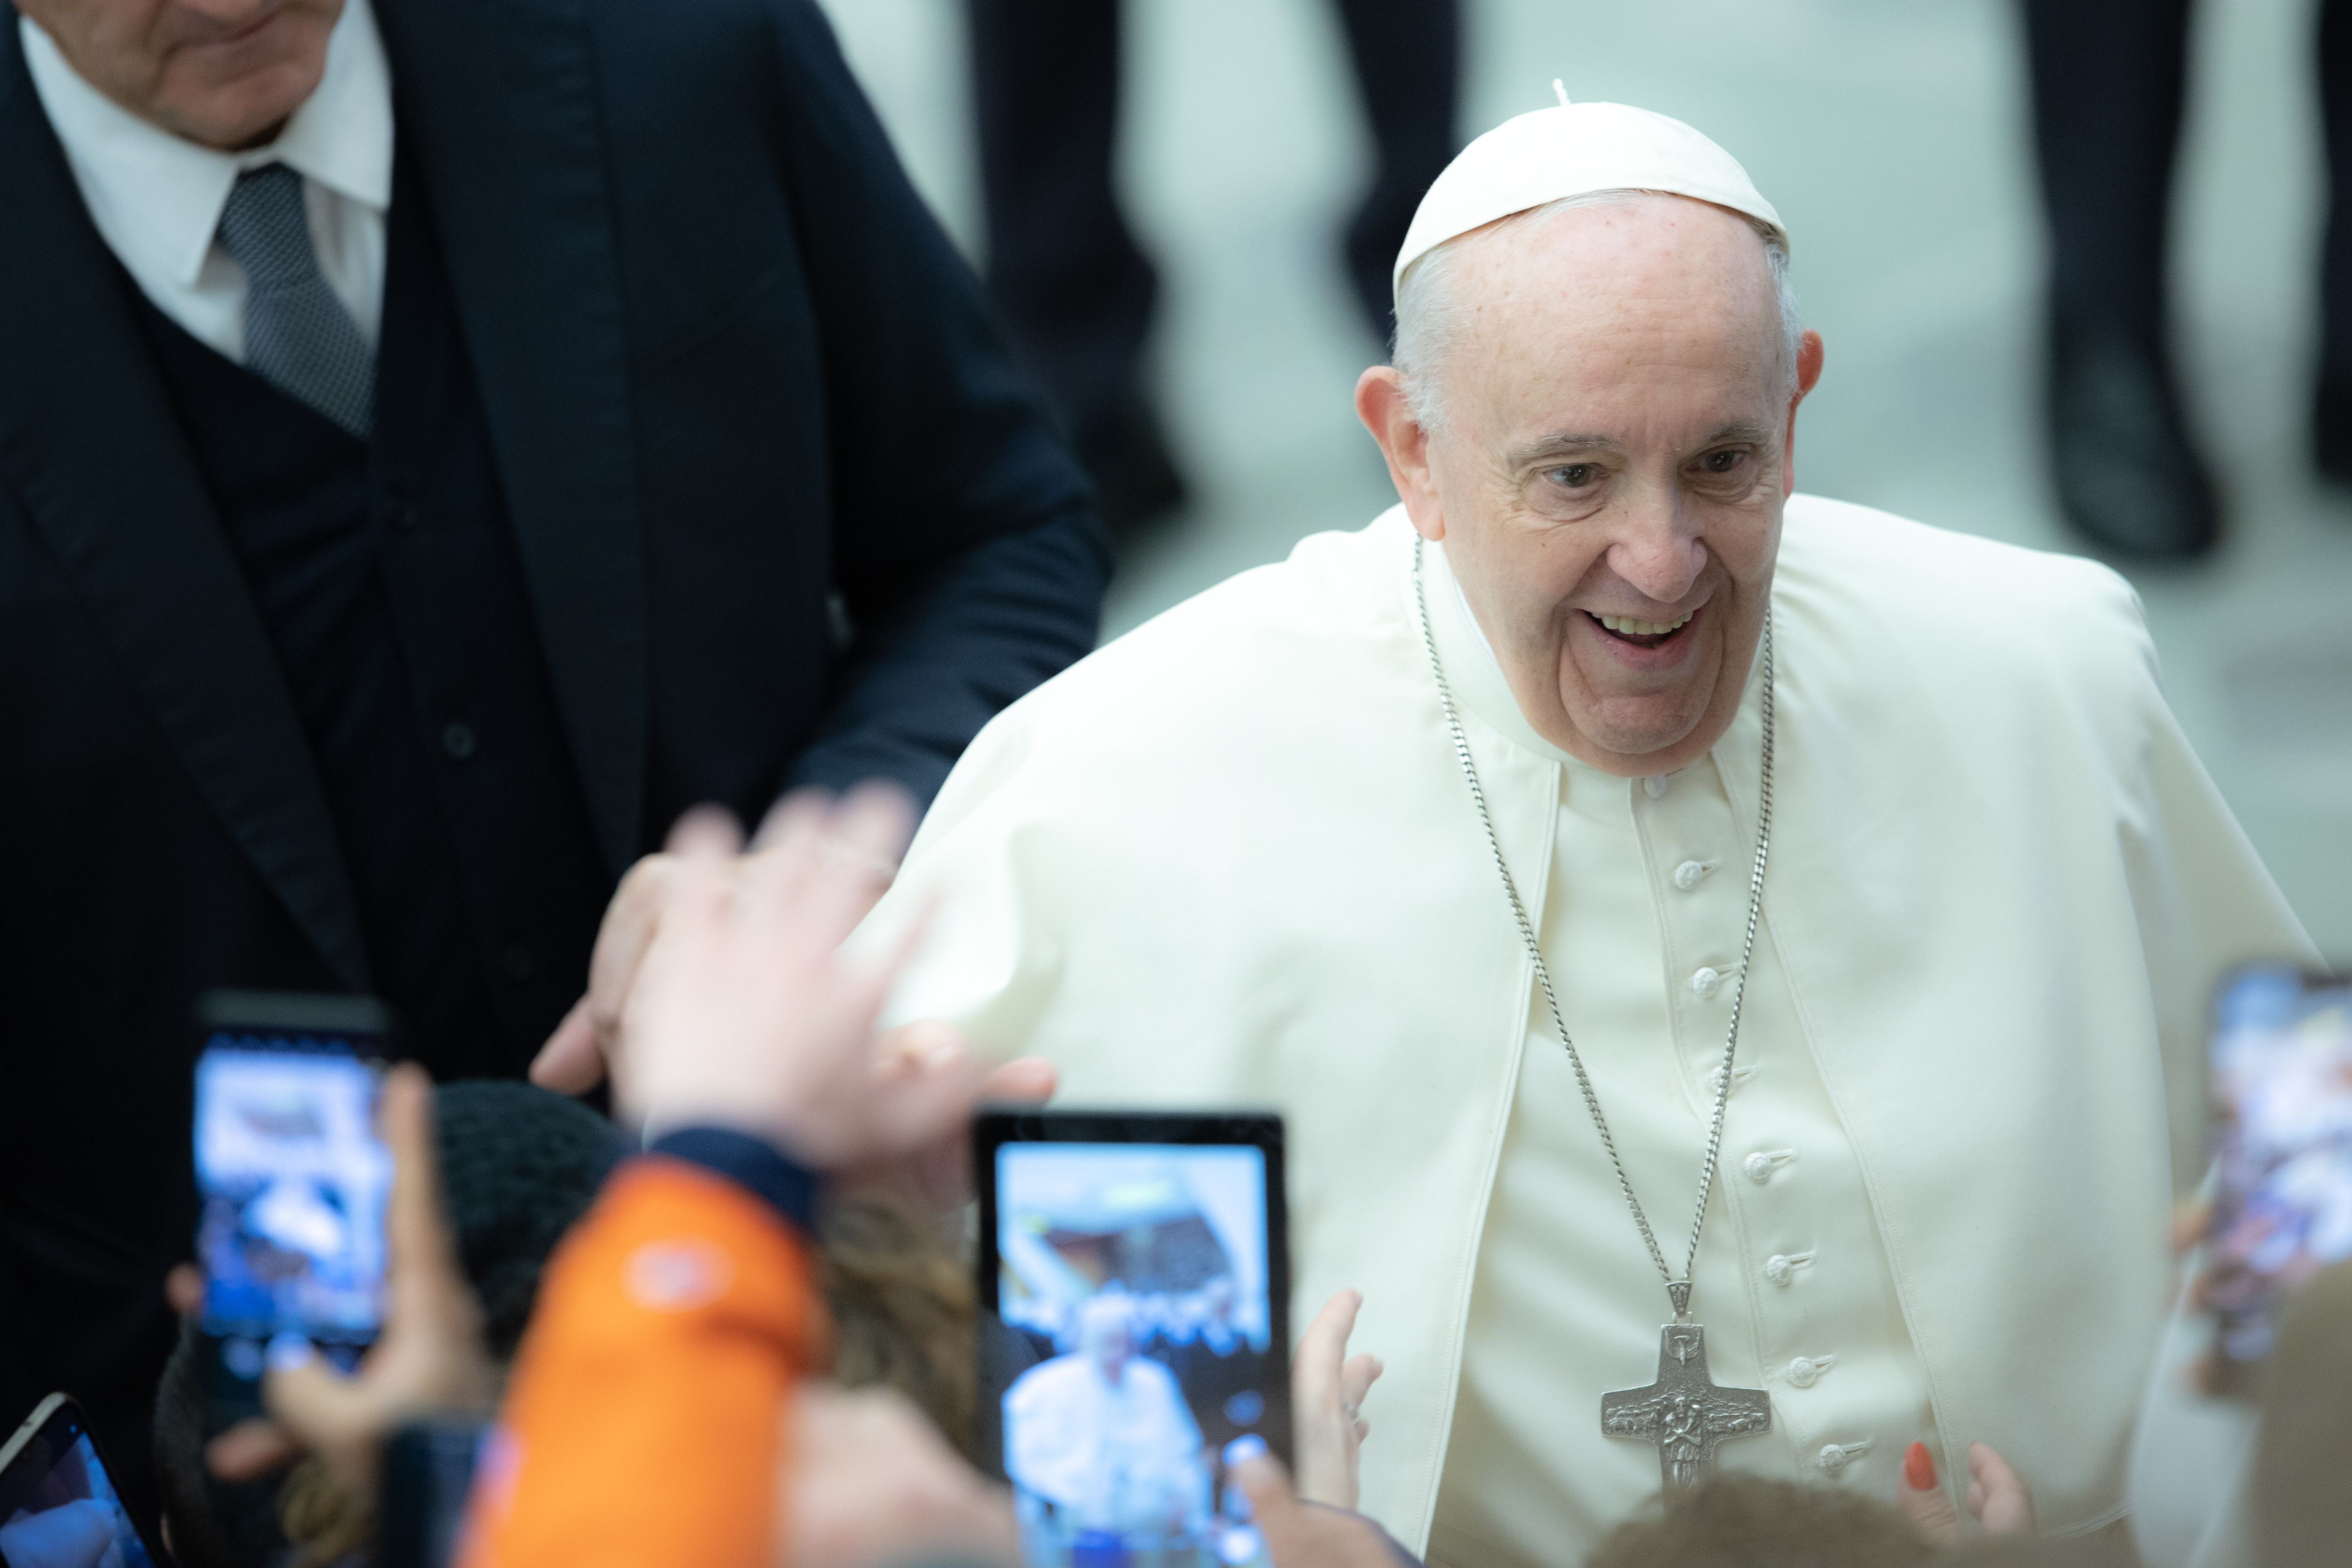 Vatican releases pastoral reflection on Christian engagement with social media